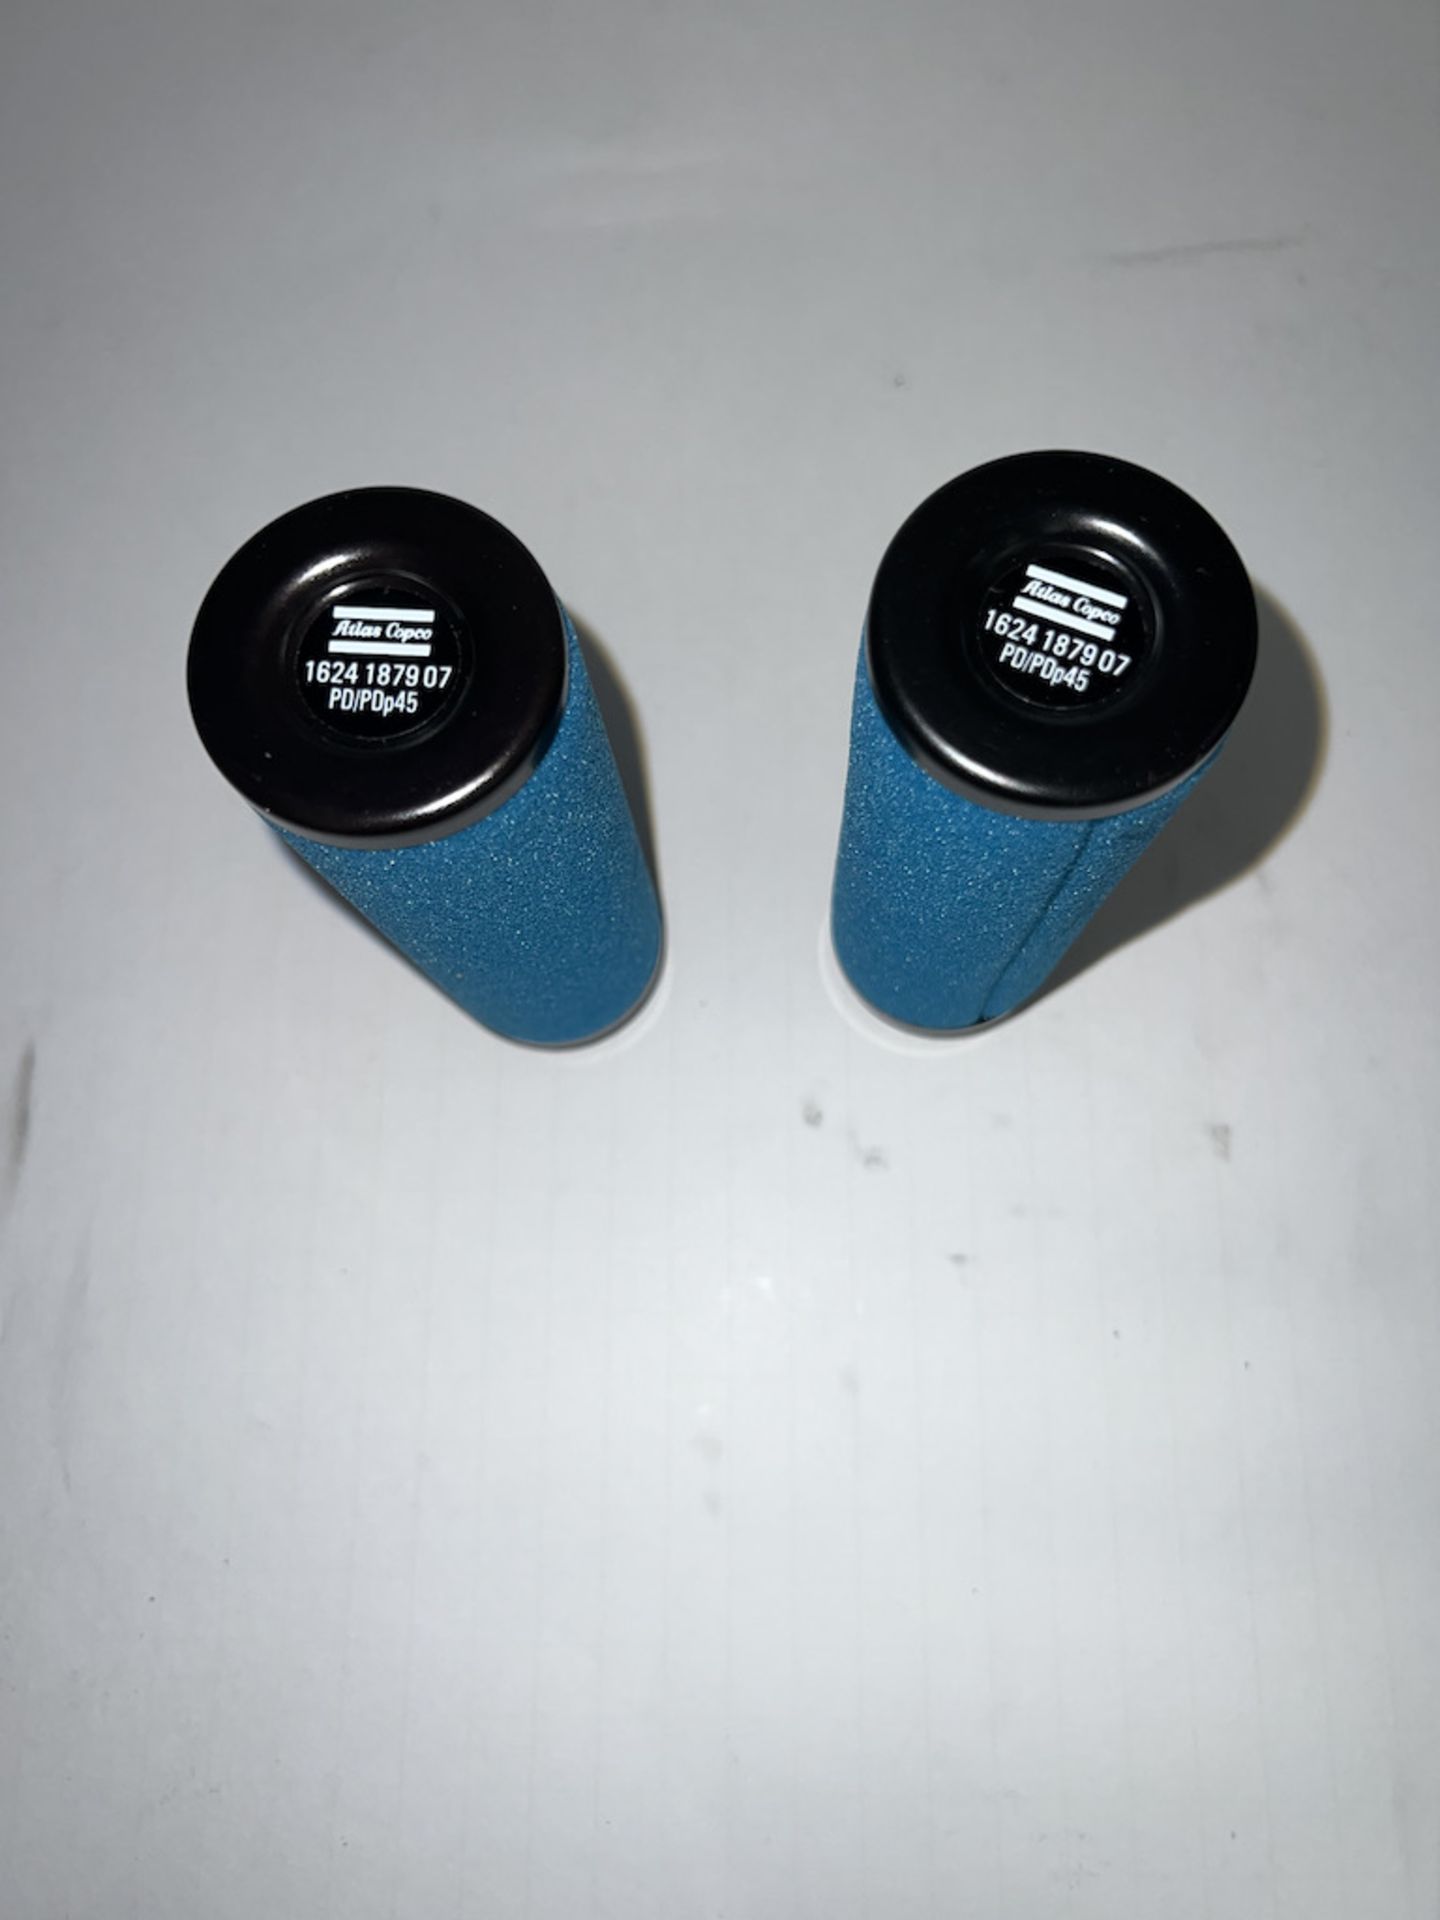 Lot of 2 Atlas CopCo Filter Kit PD45 - Image 2 of 2